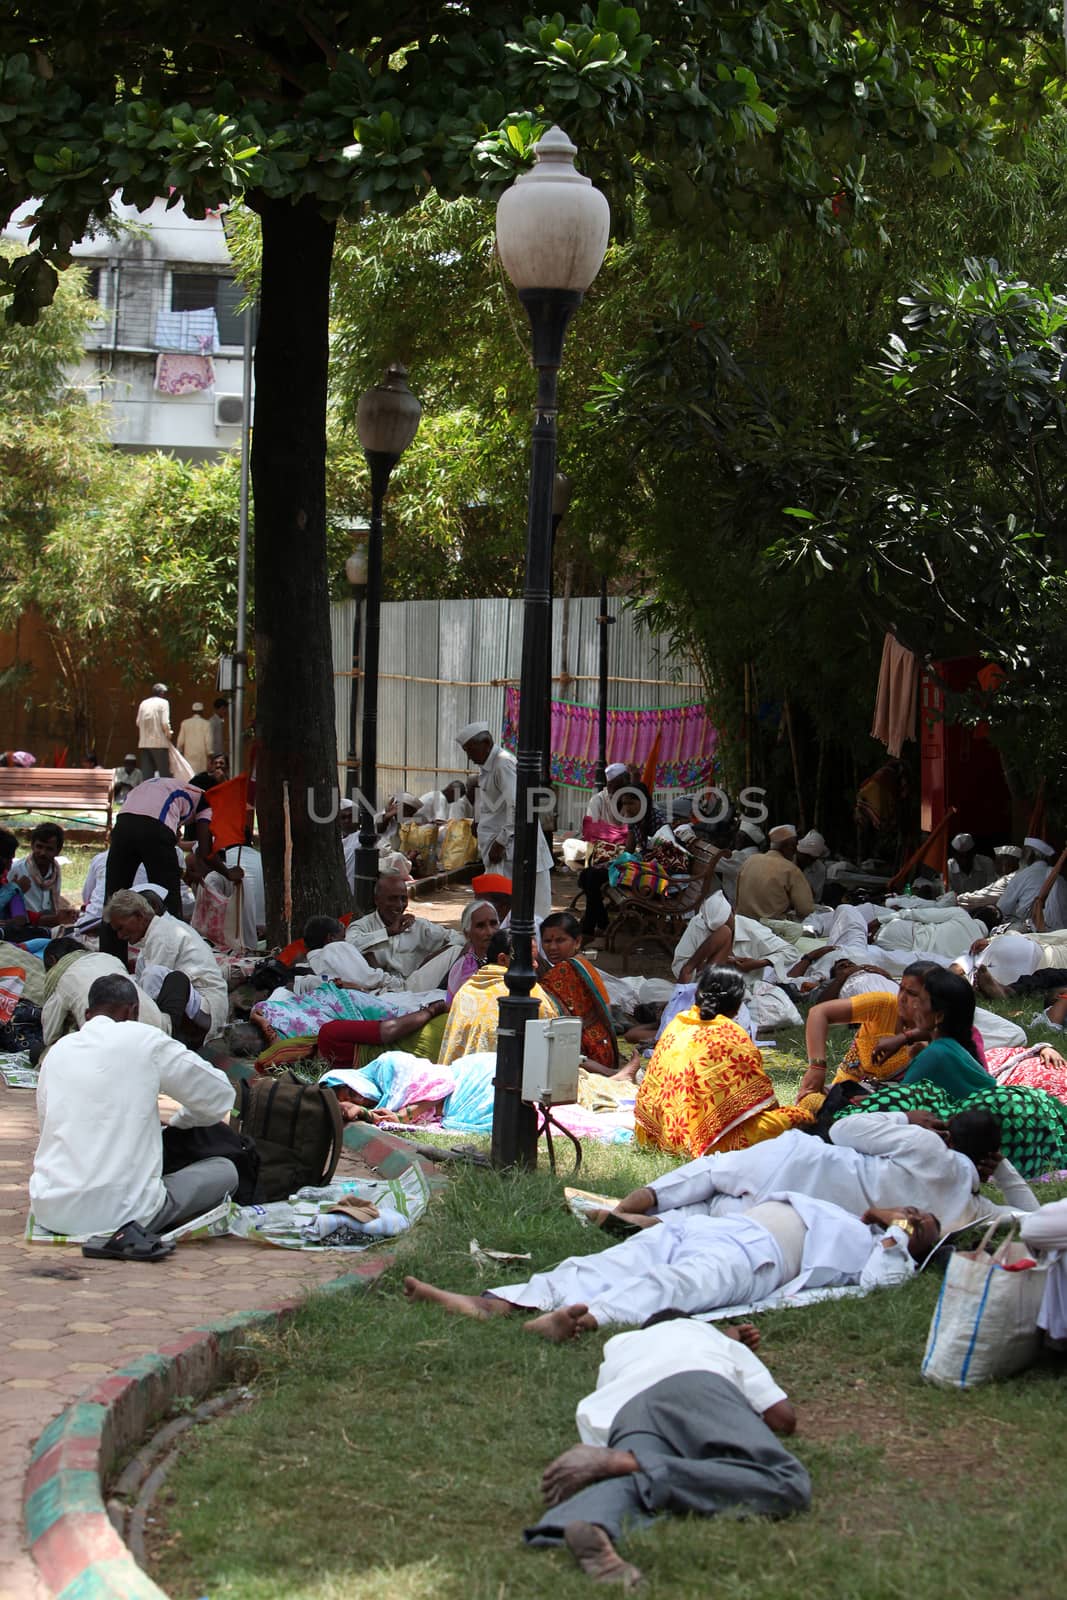 Pune, India - July 11, 2015: Indian Pilgrims called Warkaris resting in a garden during afternoon, during the famous Wari festival.